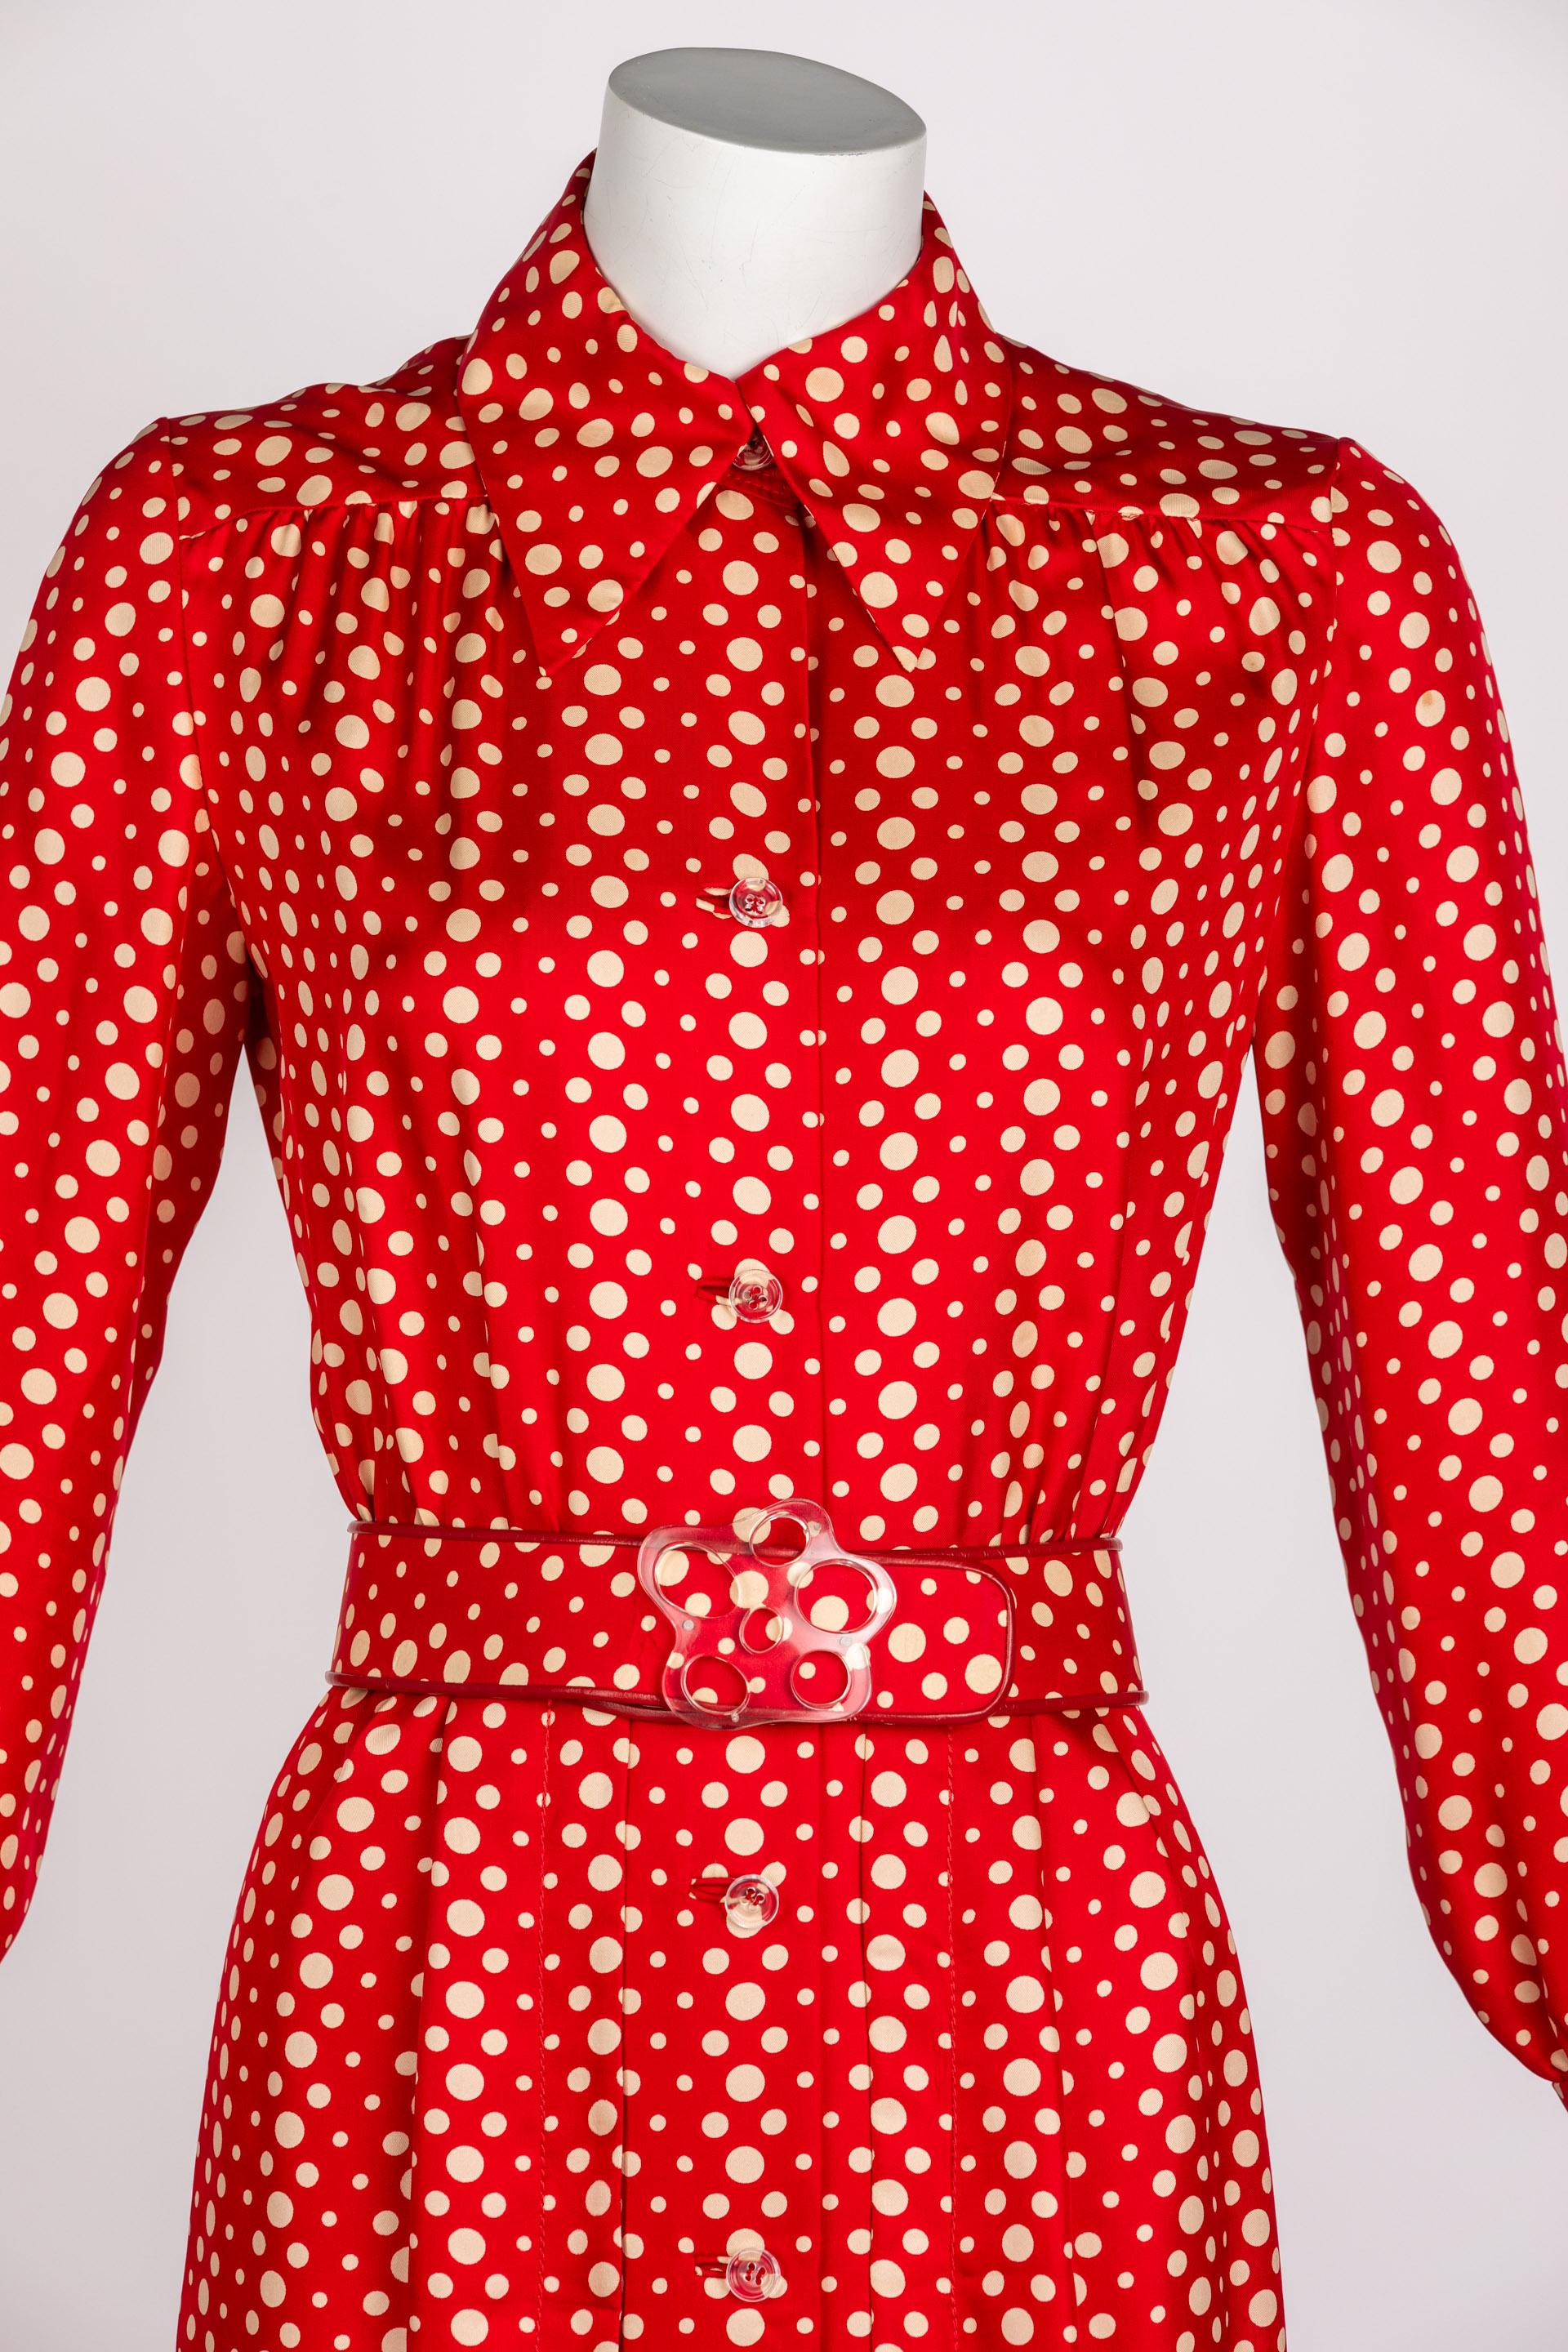 Galanos Red Polka Dot Lucite Belted Silk Maxi Dress, 1970s For Sale 4